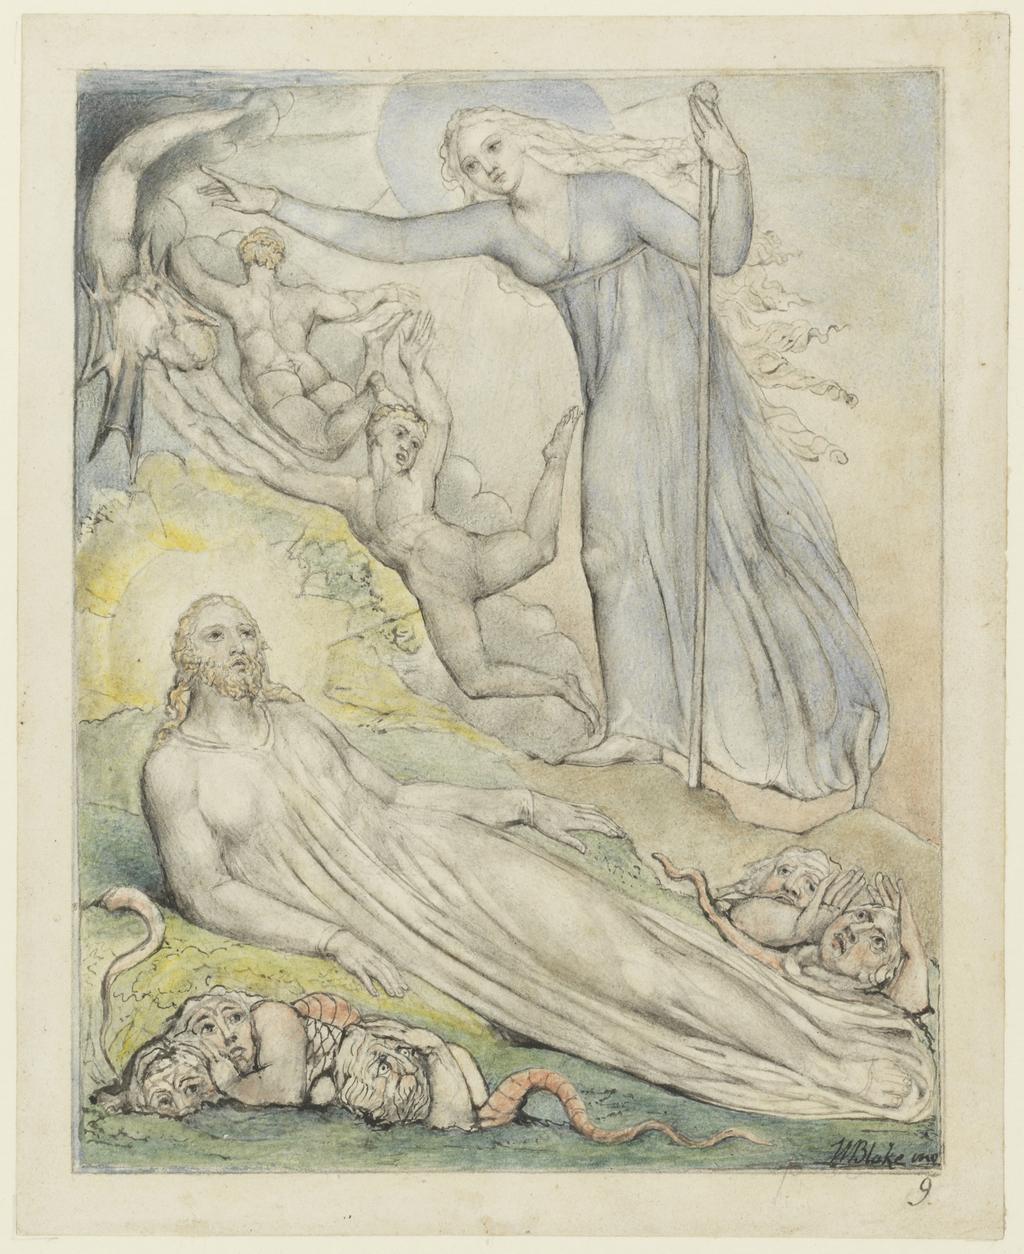 An image of Morning chasing away the phantoms. Paradise Regained. Blake, William (British, 1757-1827). Pen, Indian ink, grey wash and watercolour on paper, height 165 mm, width 130 mm, circa 1816-1818. Production Note: One of a series of 12 designs.